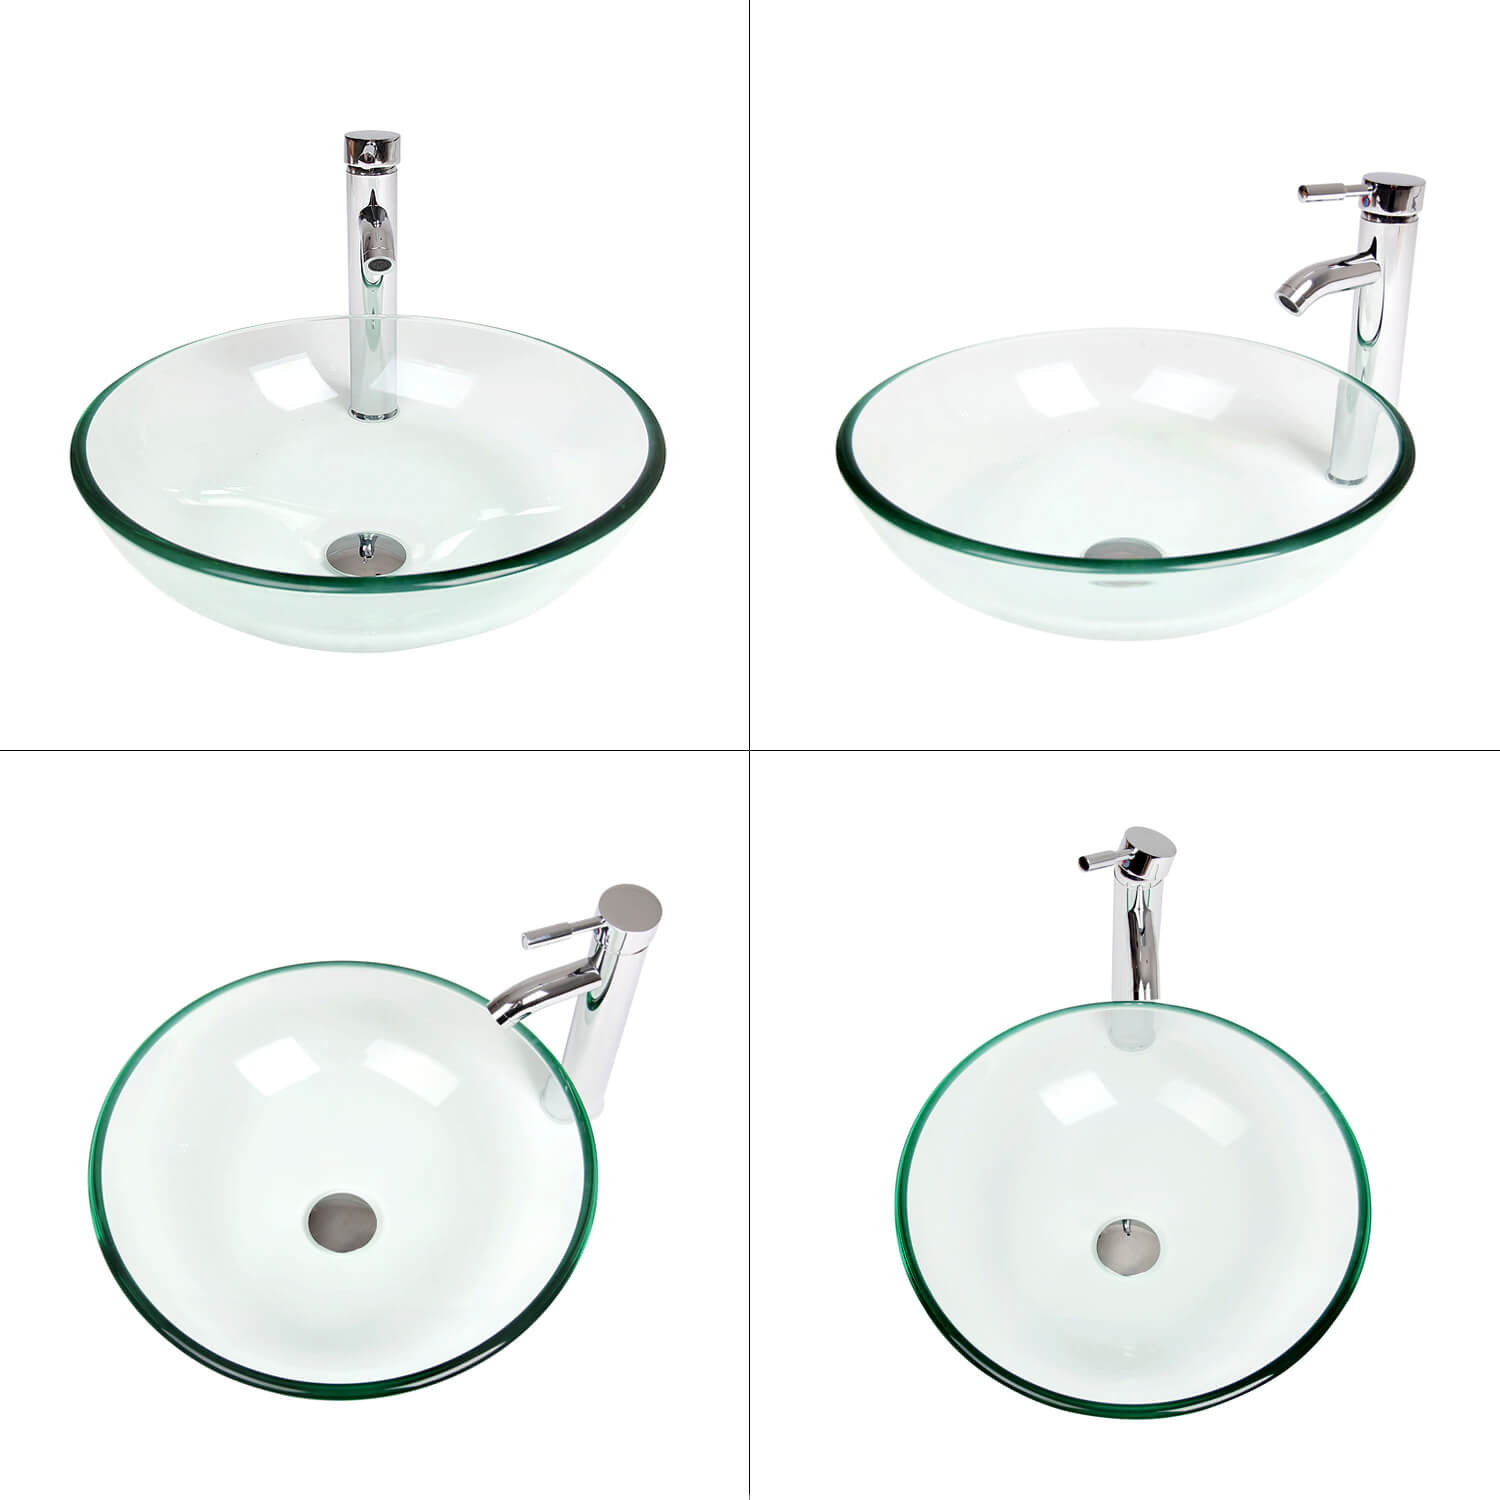 4 angle views of Elecwish clear glass sink